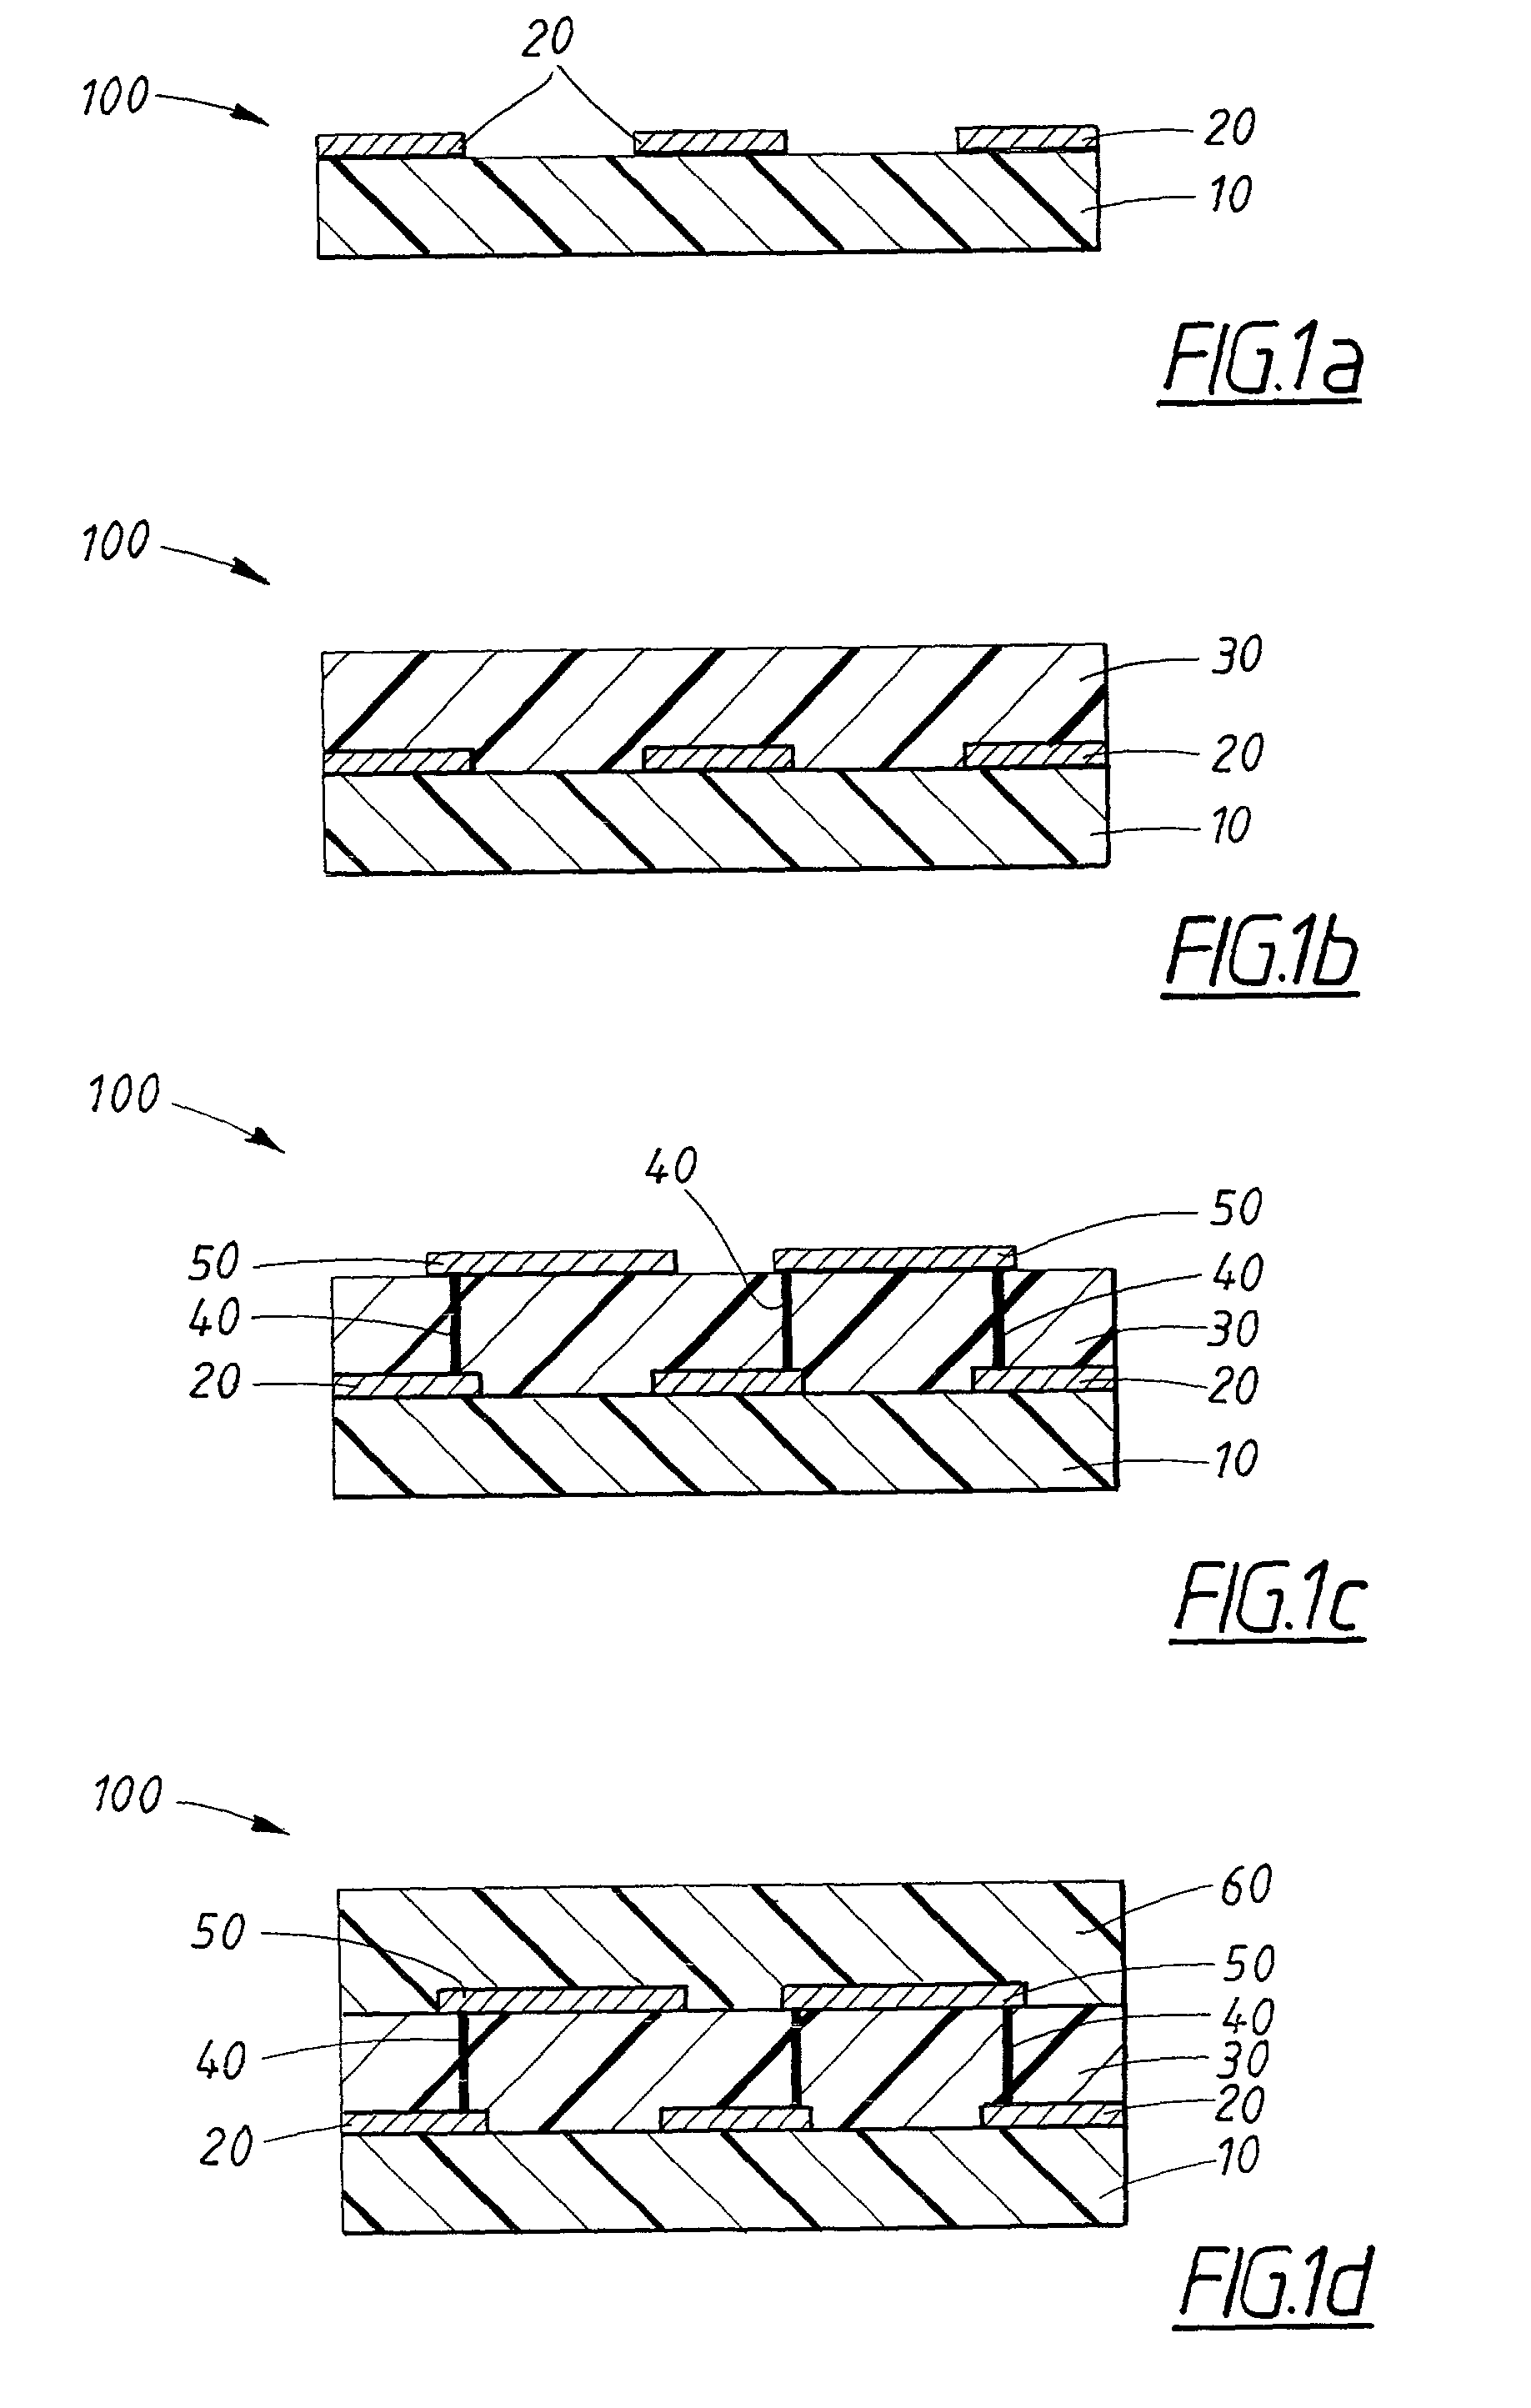 Multi-layer circuit board with supporting layers of different materials